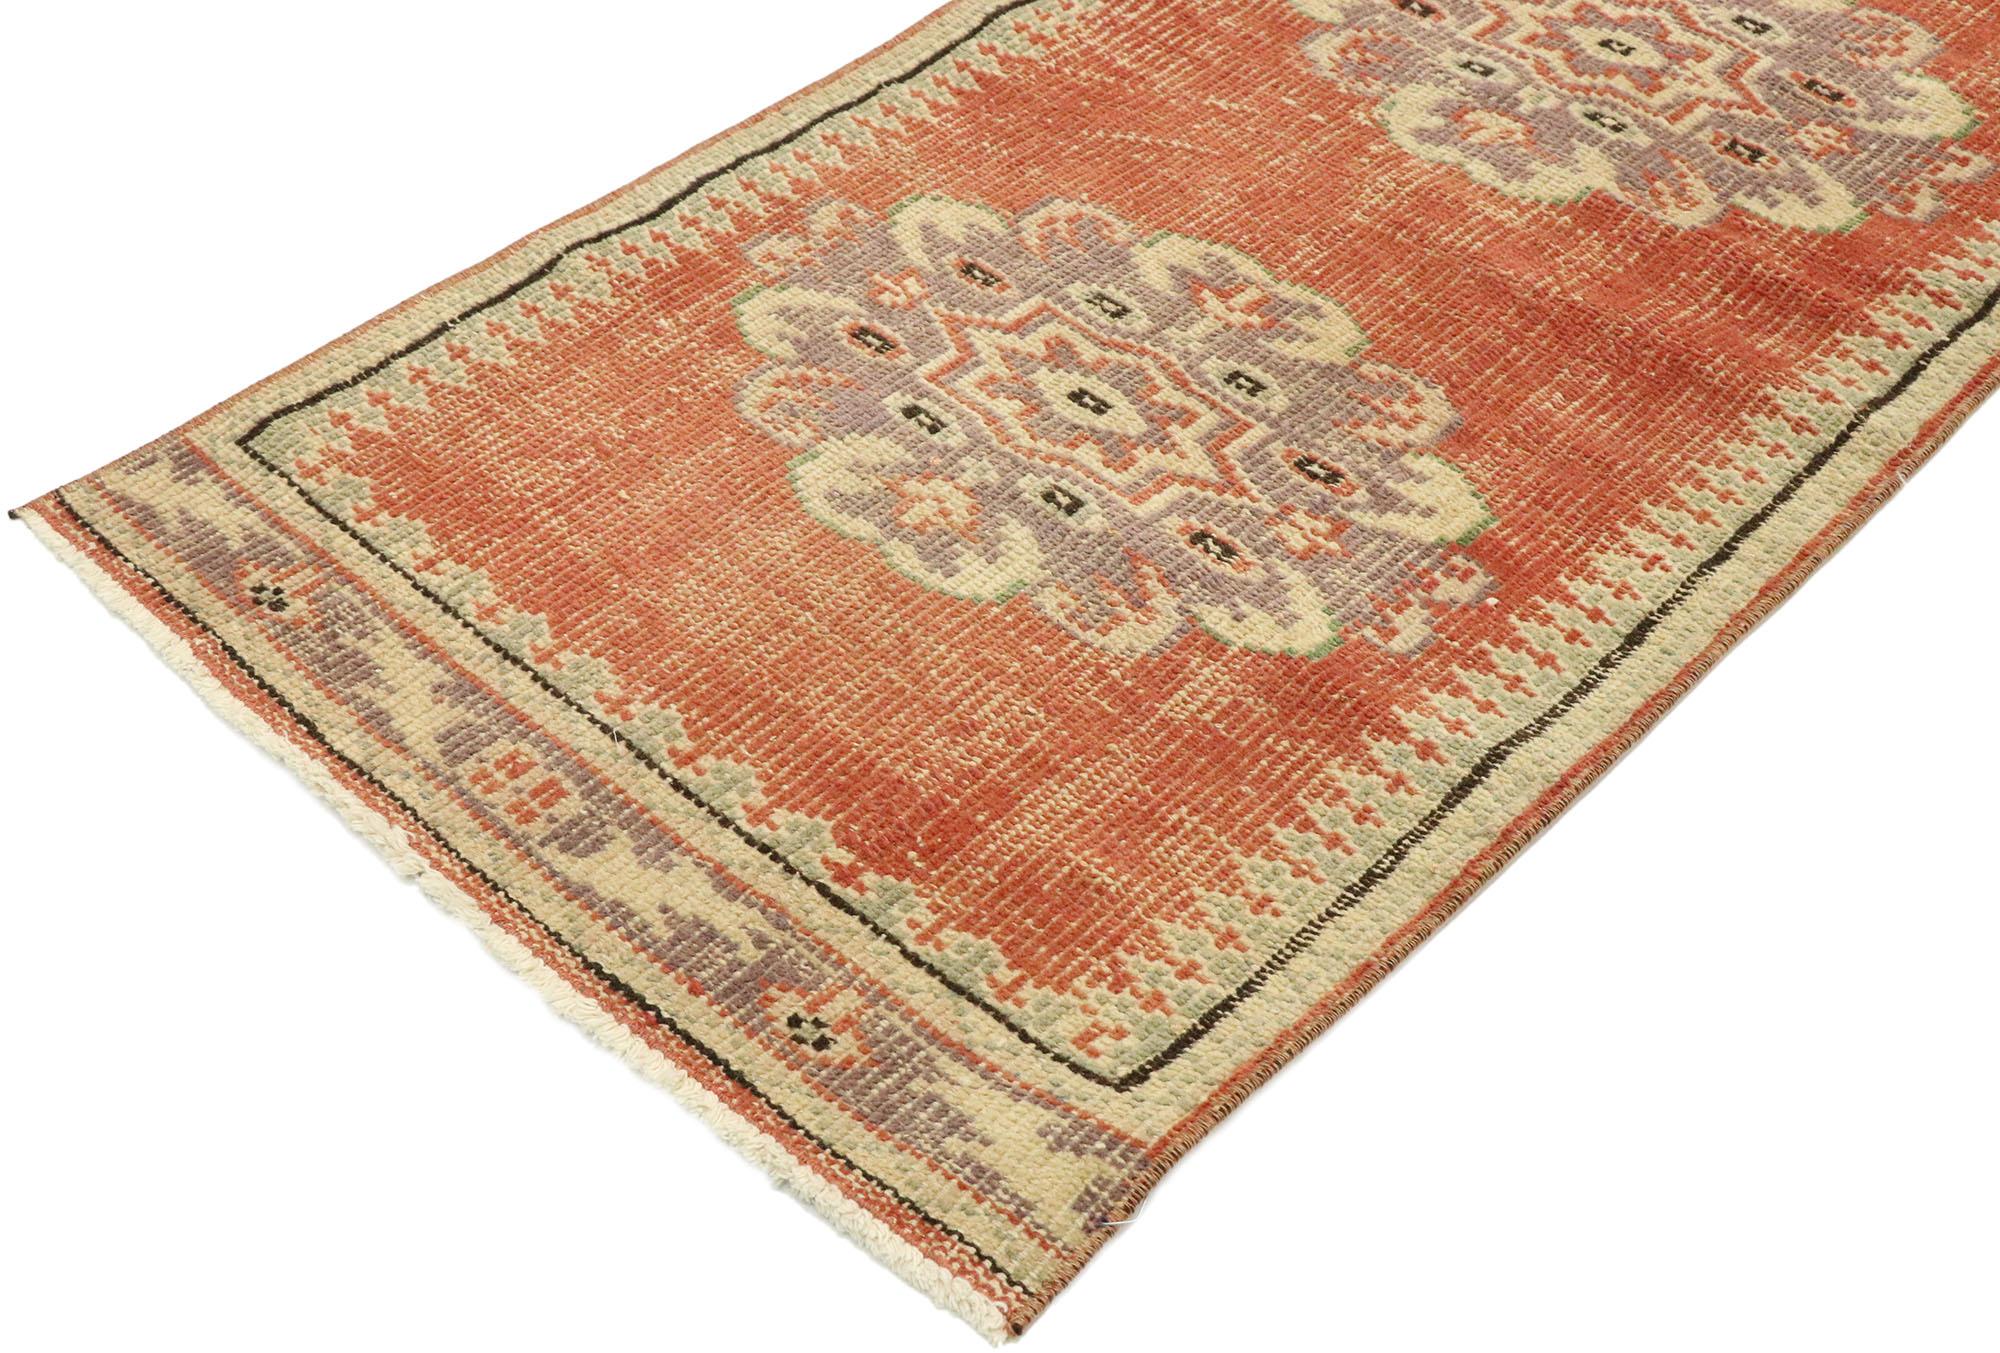 53074, vintage Turkish Sivas rug with Romantic Northwestern Artisan style. Balancing romantic connotations with rustic sensibility, this hand knotted wool distressed vintage Persian Mahal Design rug beautifully embodies Northwestern Artisan style.